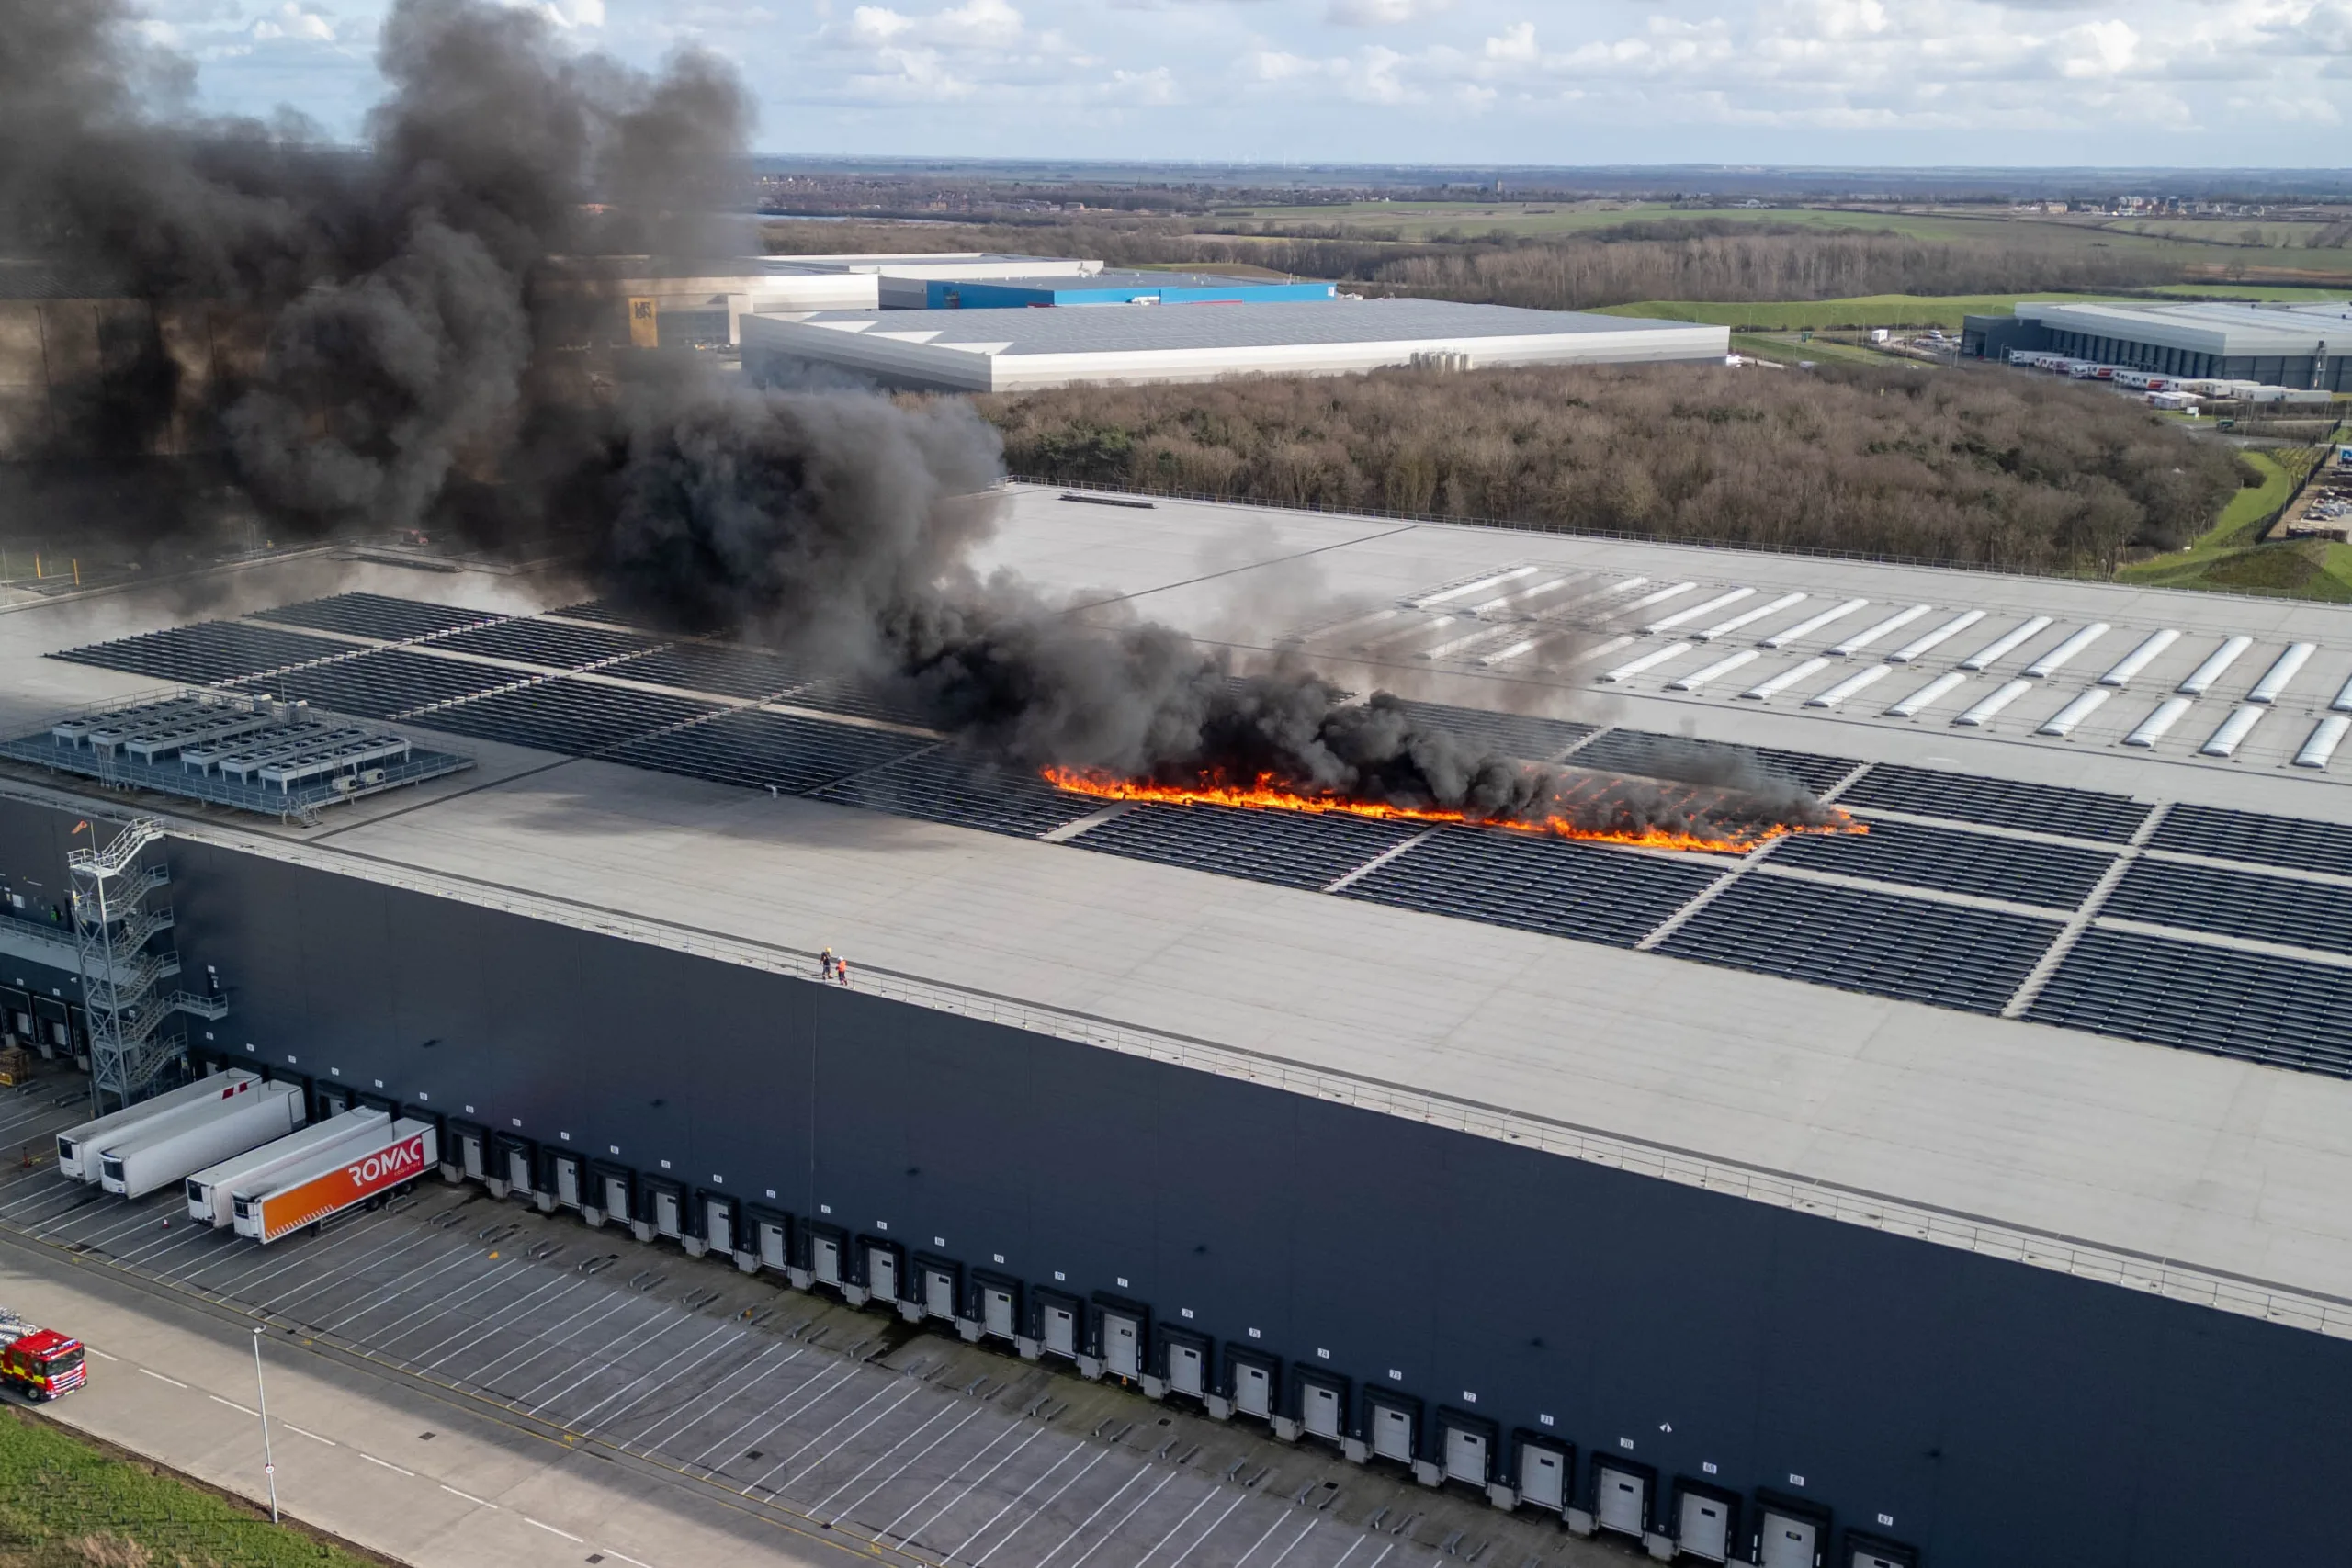 Lidl Warehouse Solar Panels on fire, Alwalton Hill, Peterborough§ Friday 23 February 2024. Picture by Terry Harris.